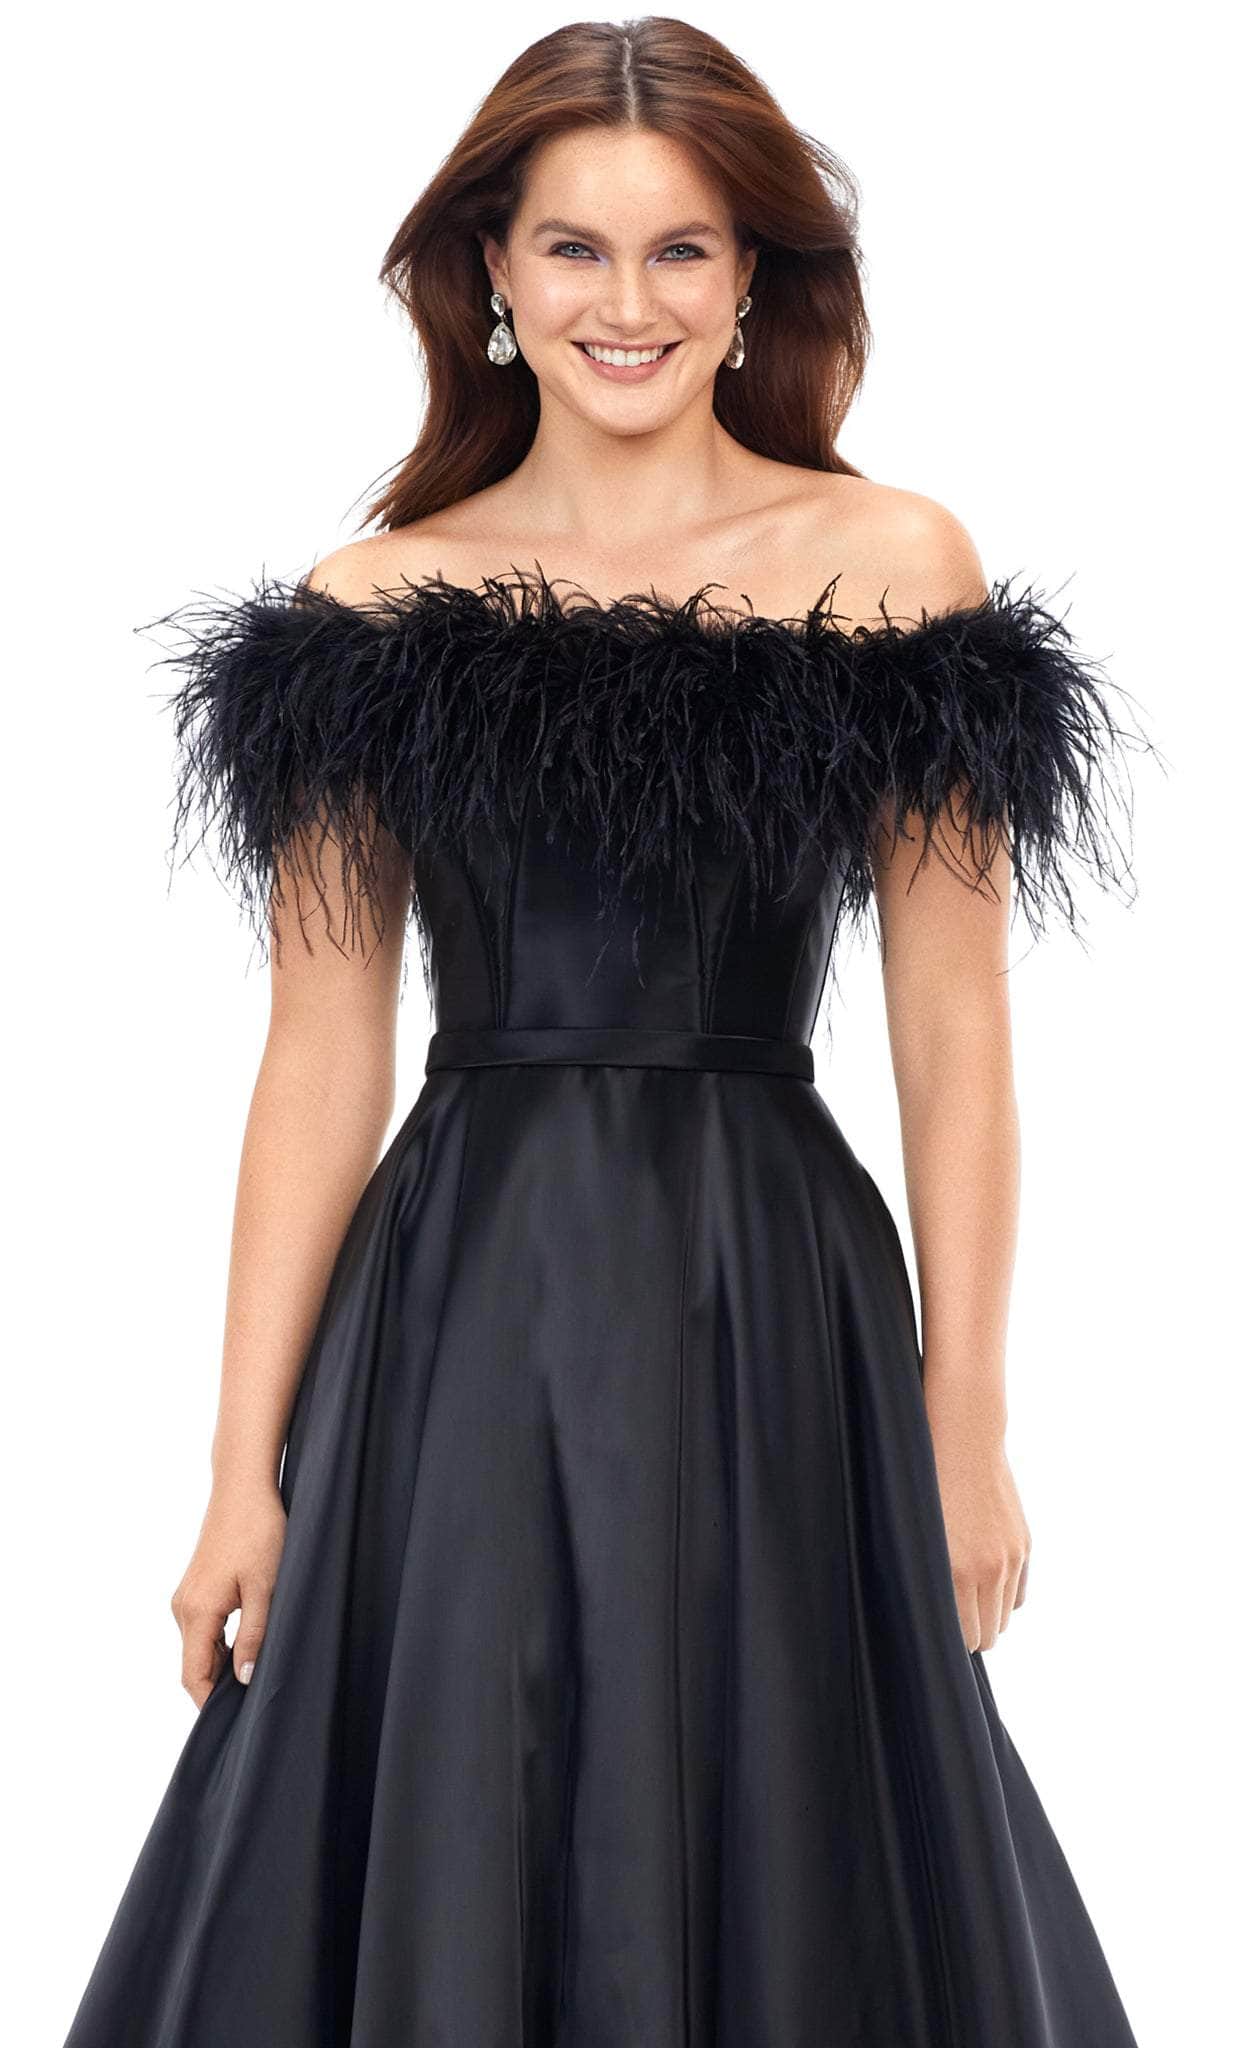 Ashley Lauren 11382 - Feathered Off-Shoulder Ballgown Special Occasion Dress